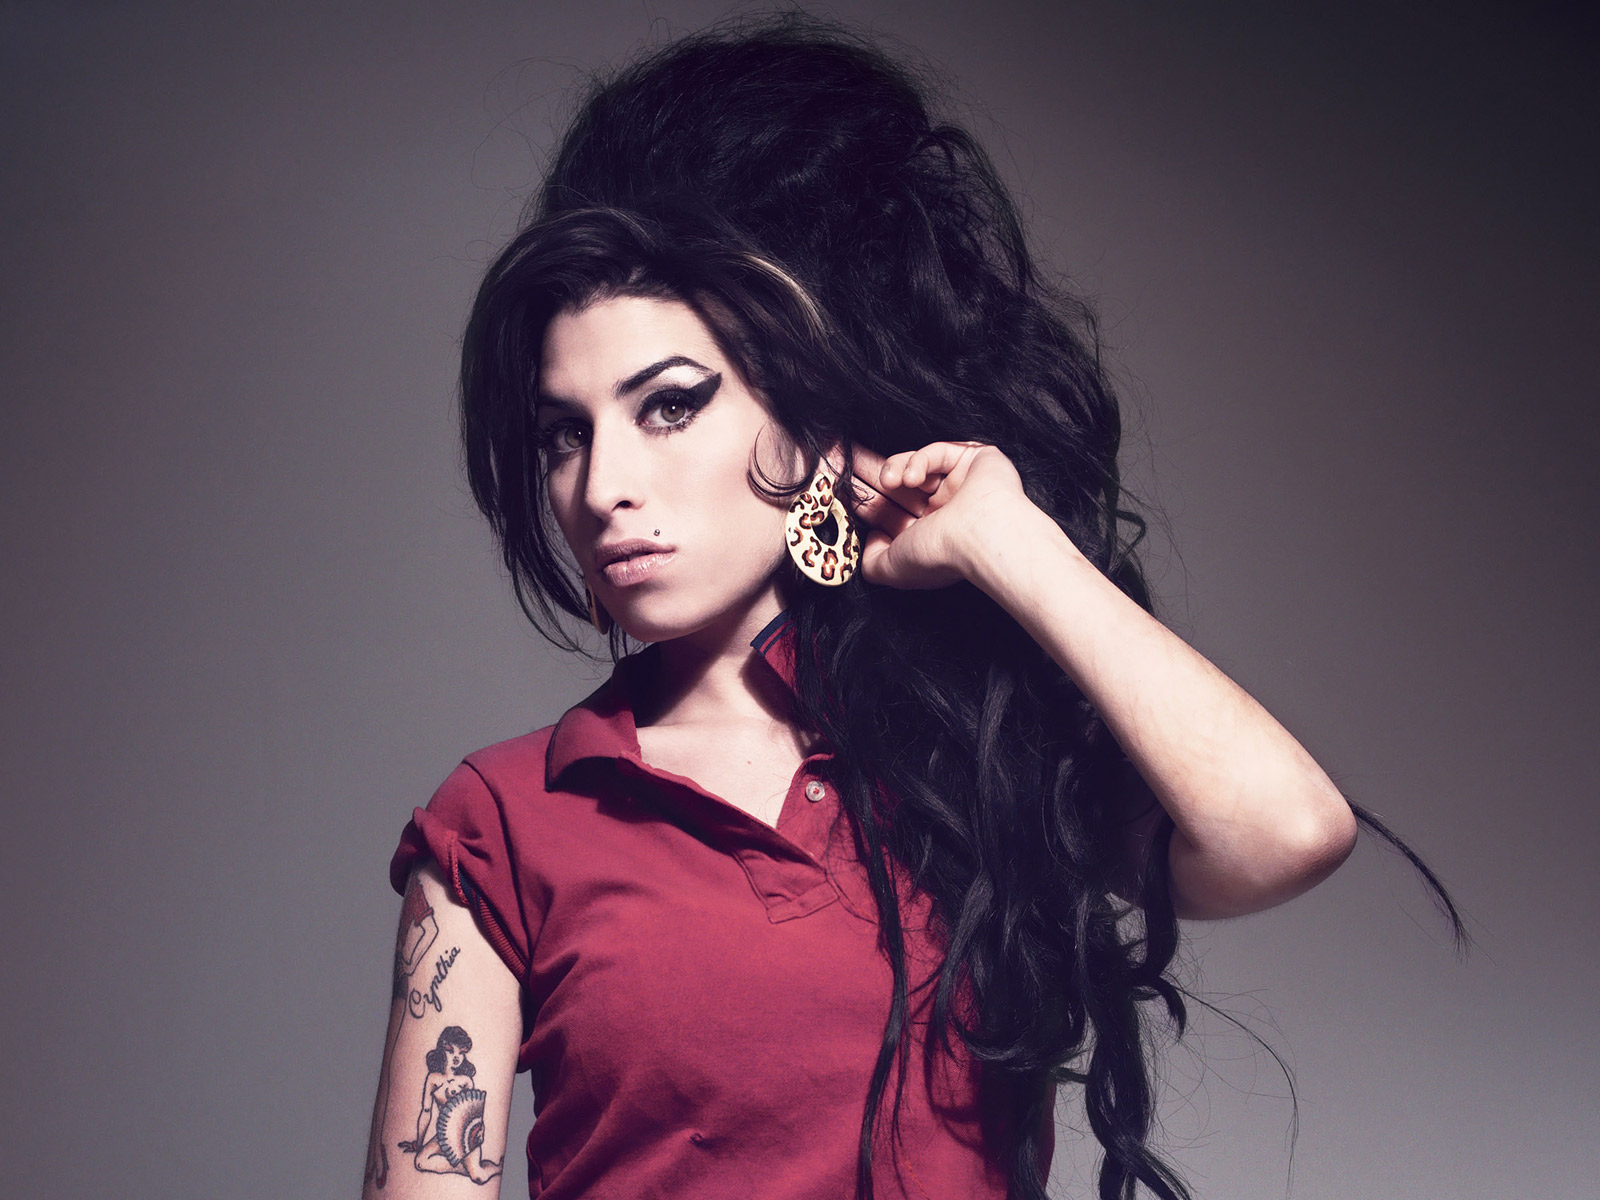 ... amongst the team behind the BAFTA Award-winning Senna, is poised to release Amy, a documentary film about the late songstress Amy Winehouse.